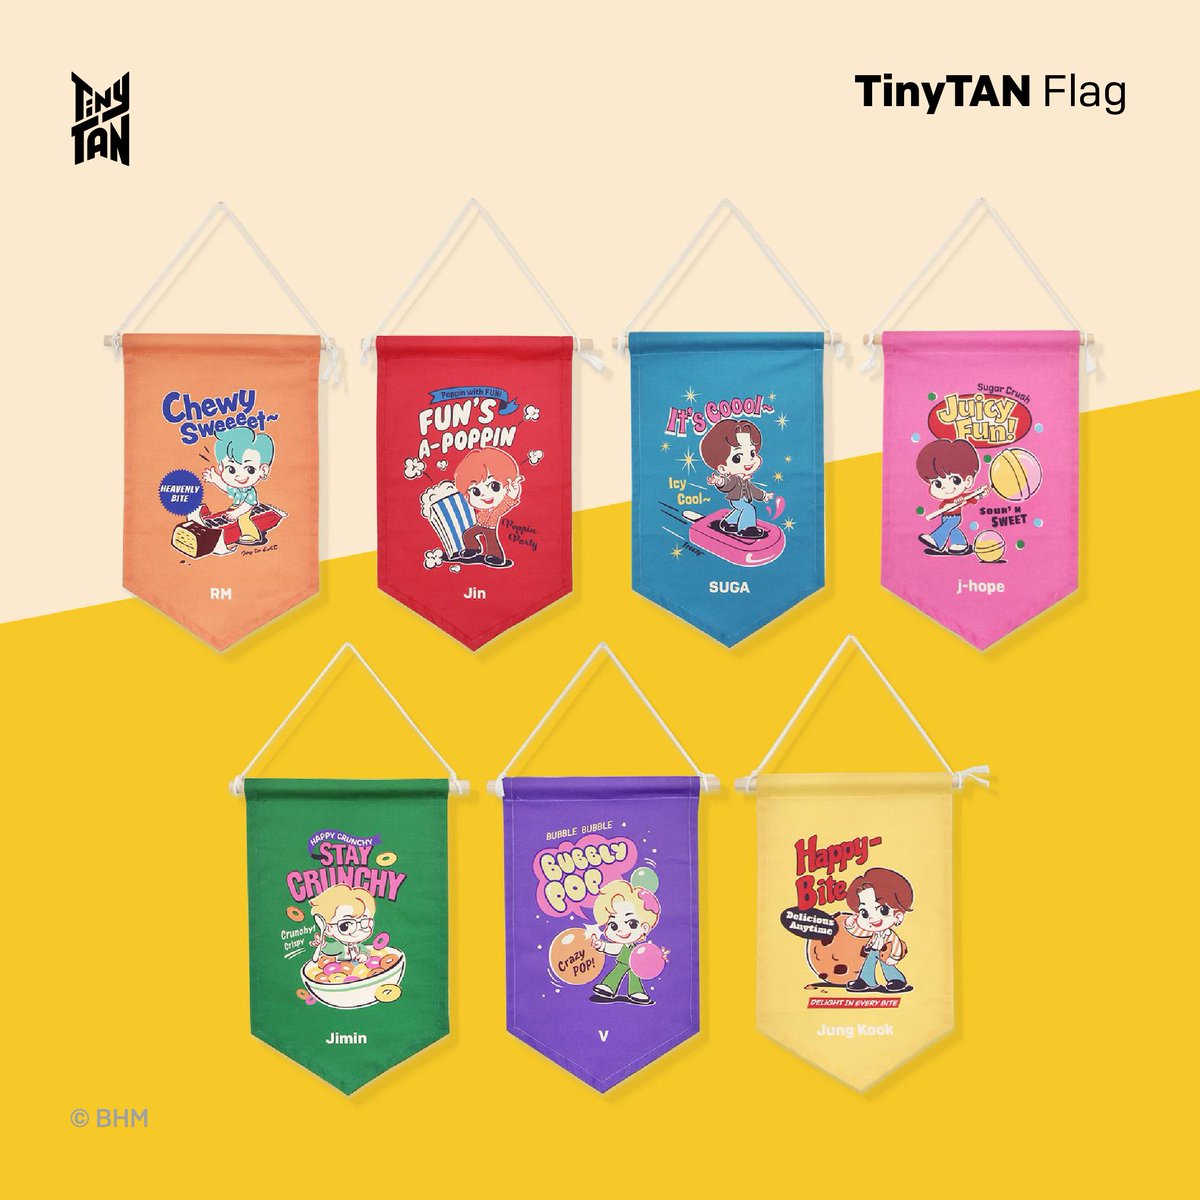 [April 2022] Newly Launched Licensed Products! TinyTAN @NARA_HOME_DECO Body Pillow & Flag available in Japan and Korea